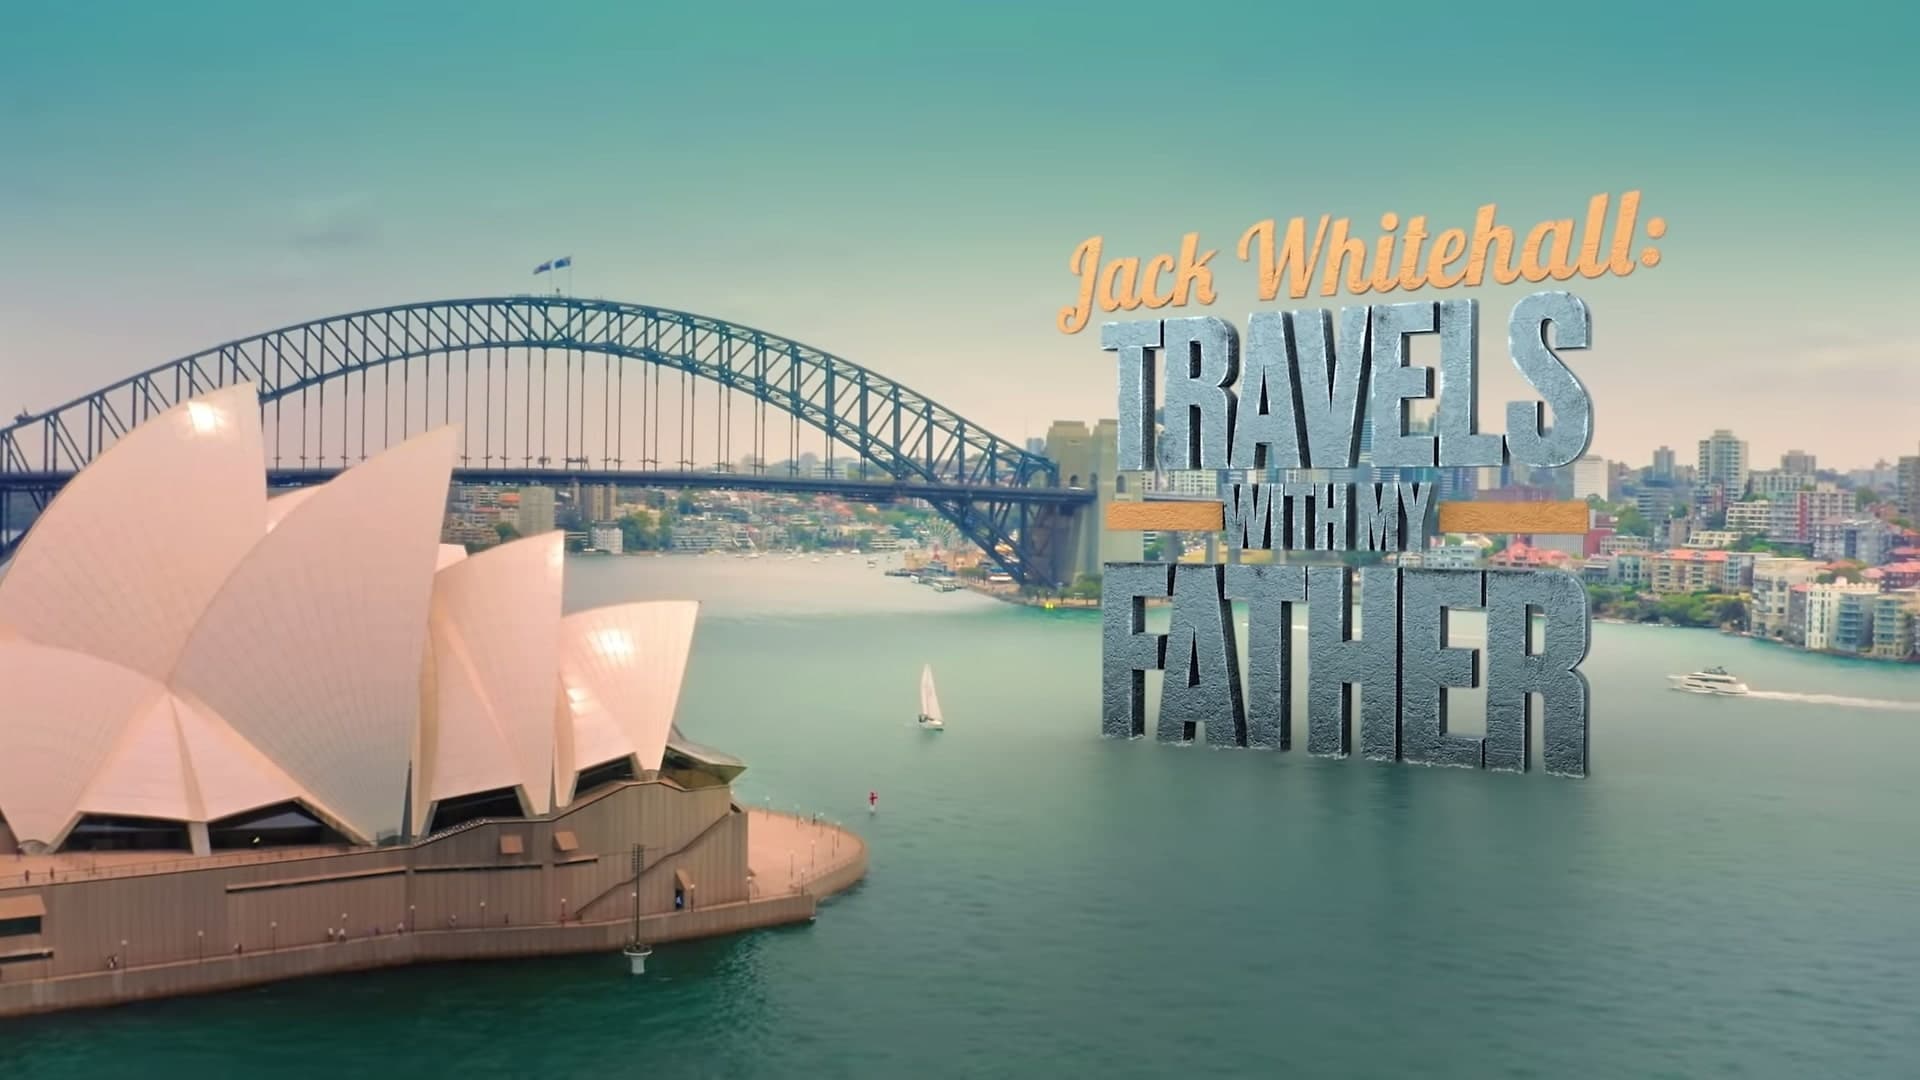 Netflix Jack Whitehall Travels with My Father Season 4 Trailer, Netflix Reality Show, Netflix Comedy Series, Coming to Netflix in September 2020